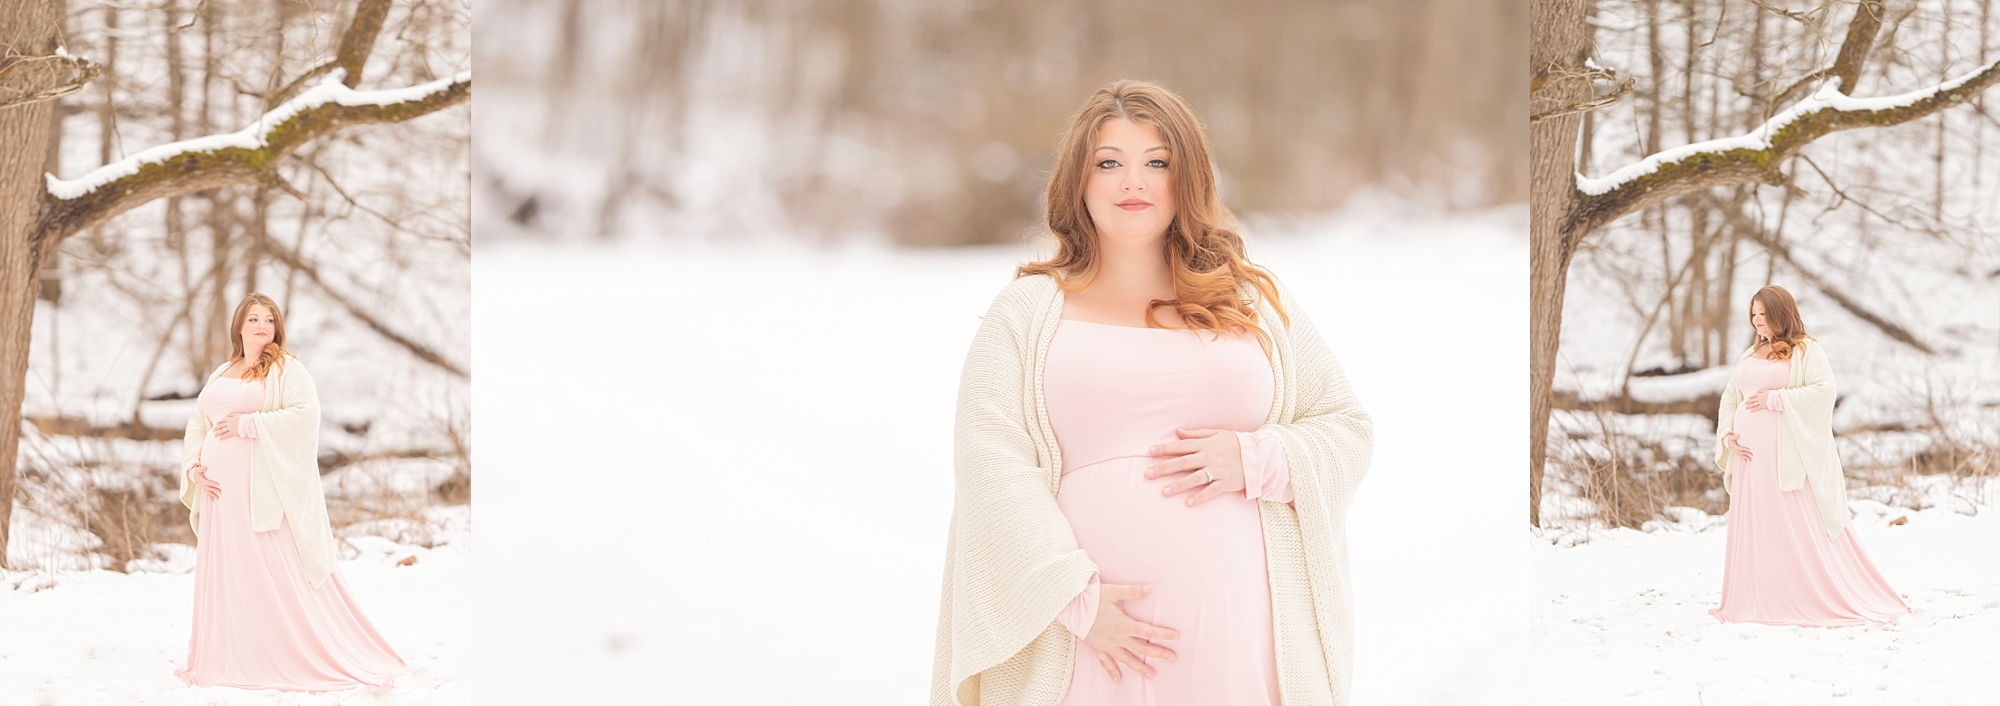 Snowy Maternity Session